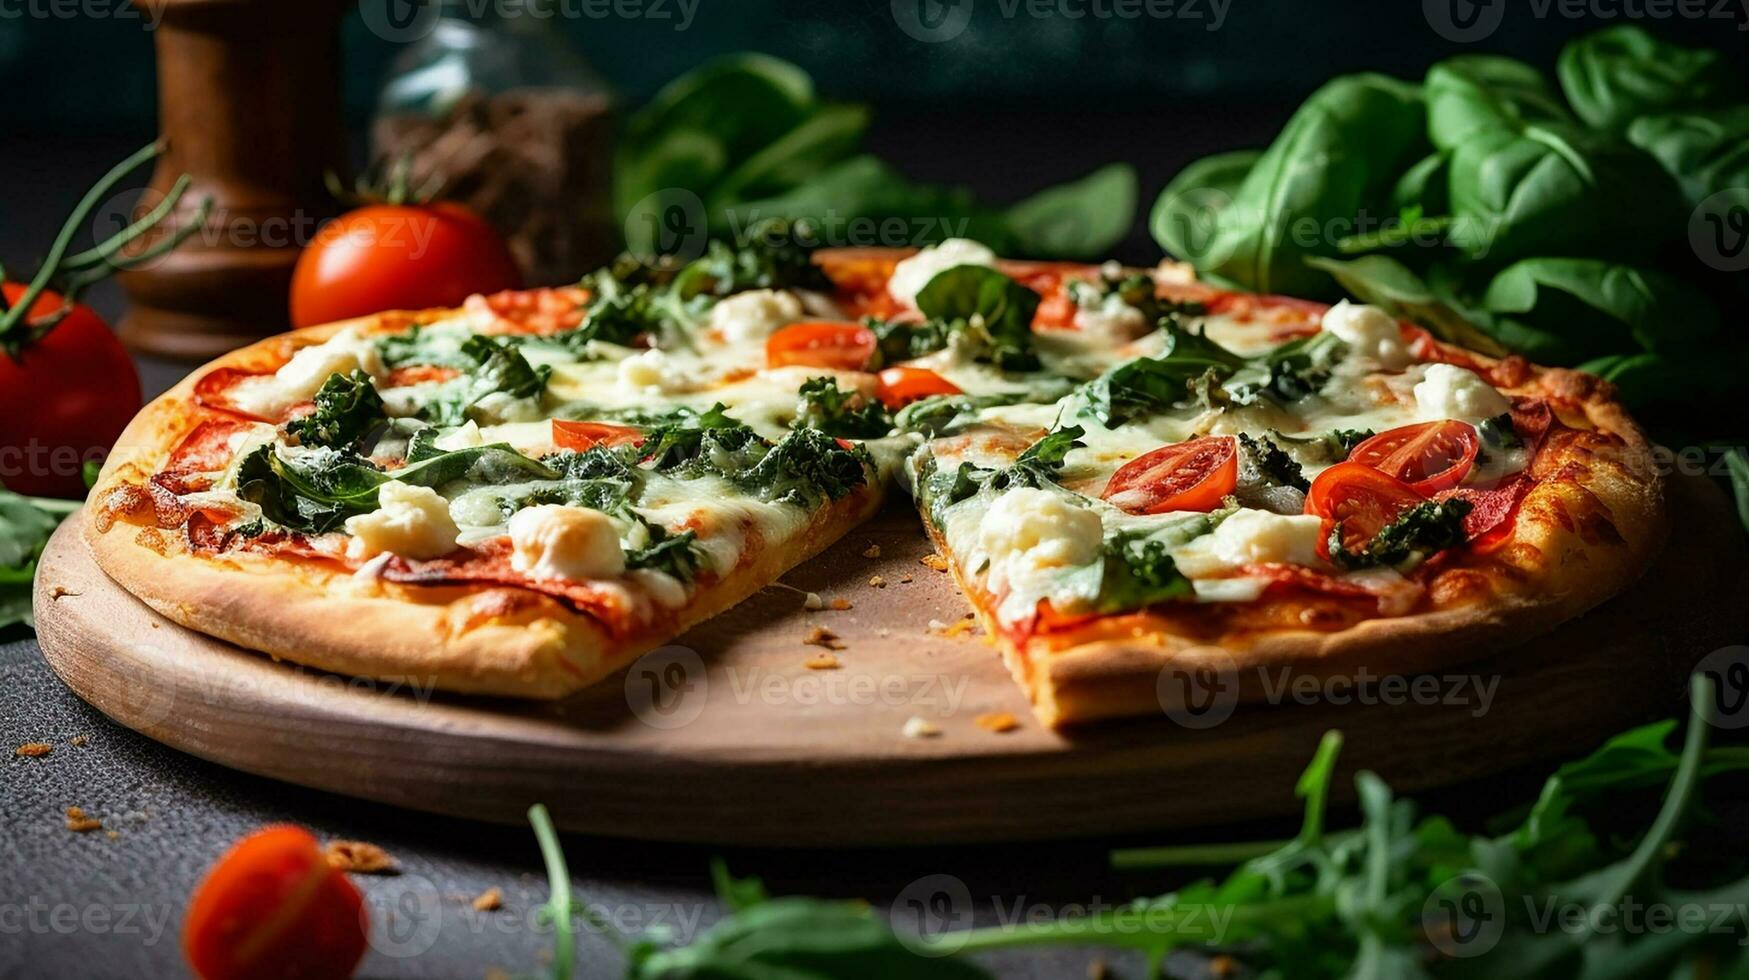 https://static.vecteezy.com/system/resources/previews/026/976/235/non_2x/pizza-with-mozzarella-tomato-greens-on-wood-plate-front-view-foodgraph-for-restaurant-cafe-magazine-website-ai-generative-photo.jpg